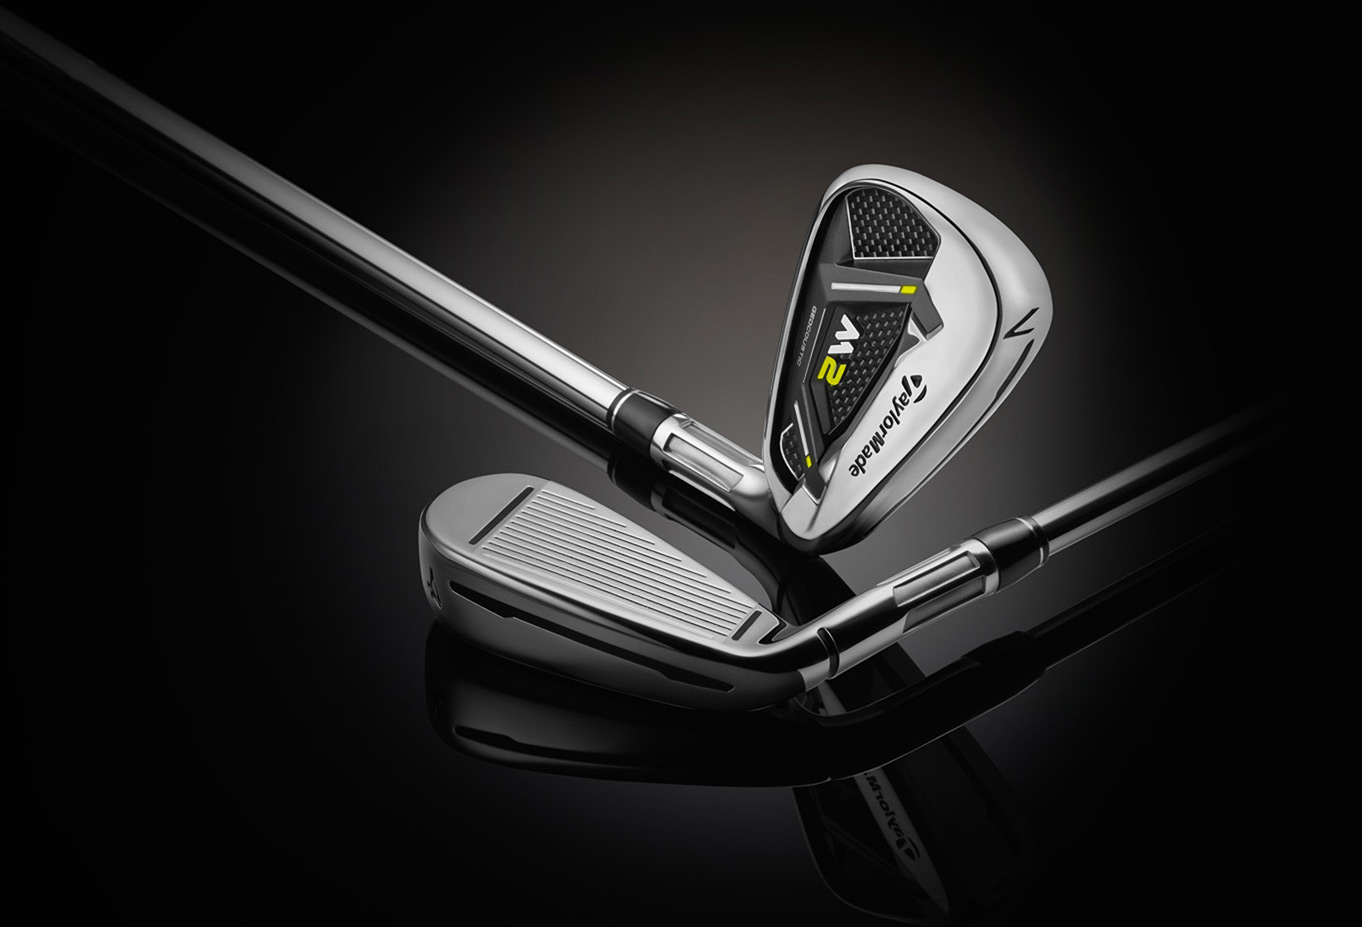 Tuning a golf club's signature "thwack" sound costs millions